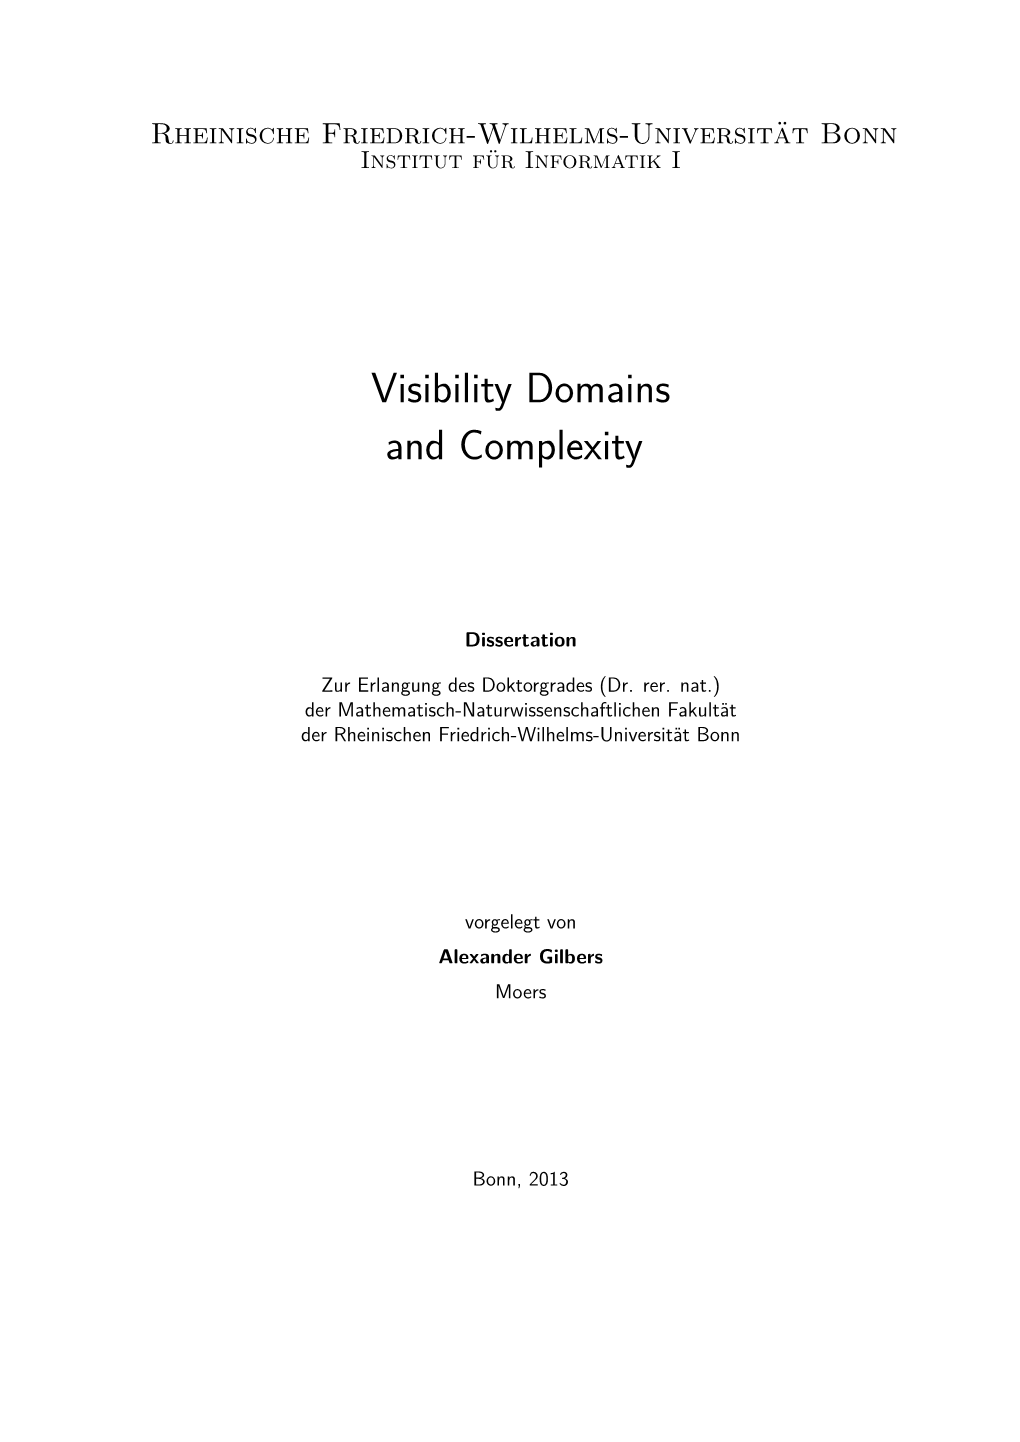 Visibility Domains and Complexity